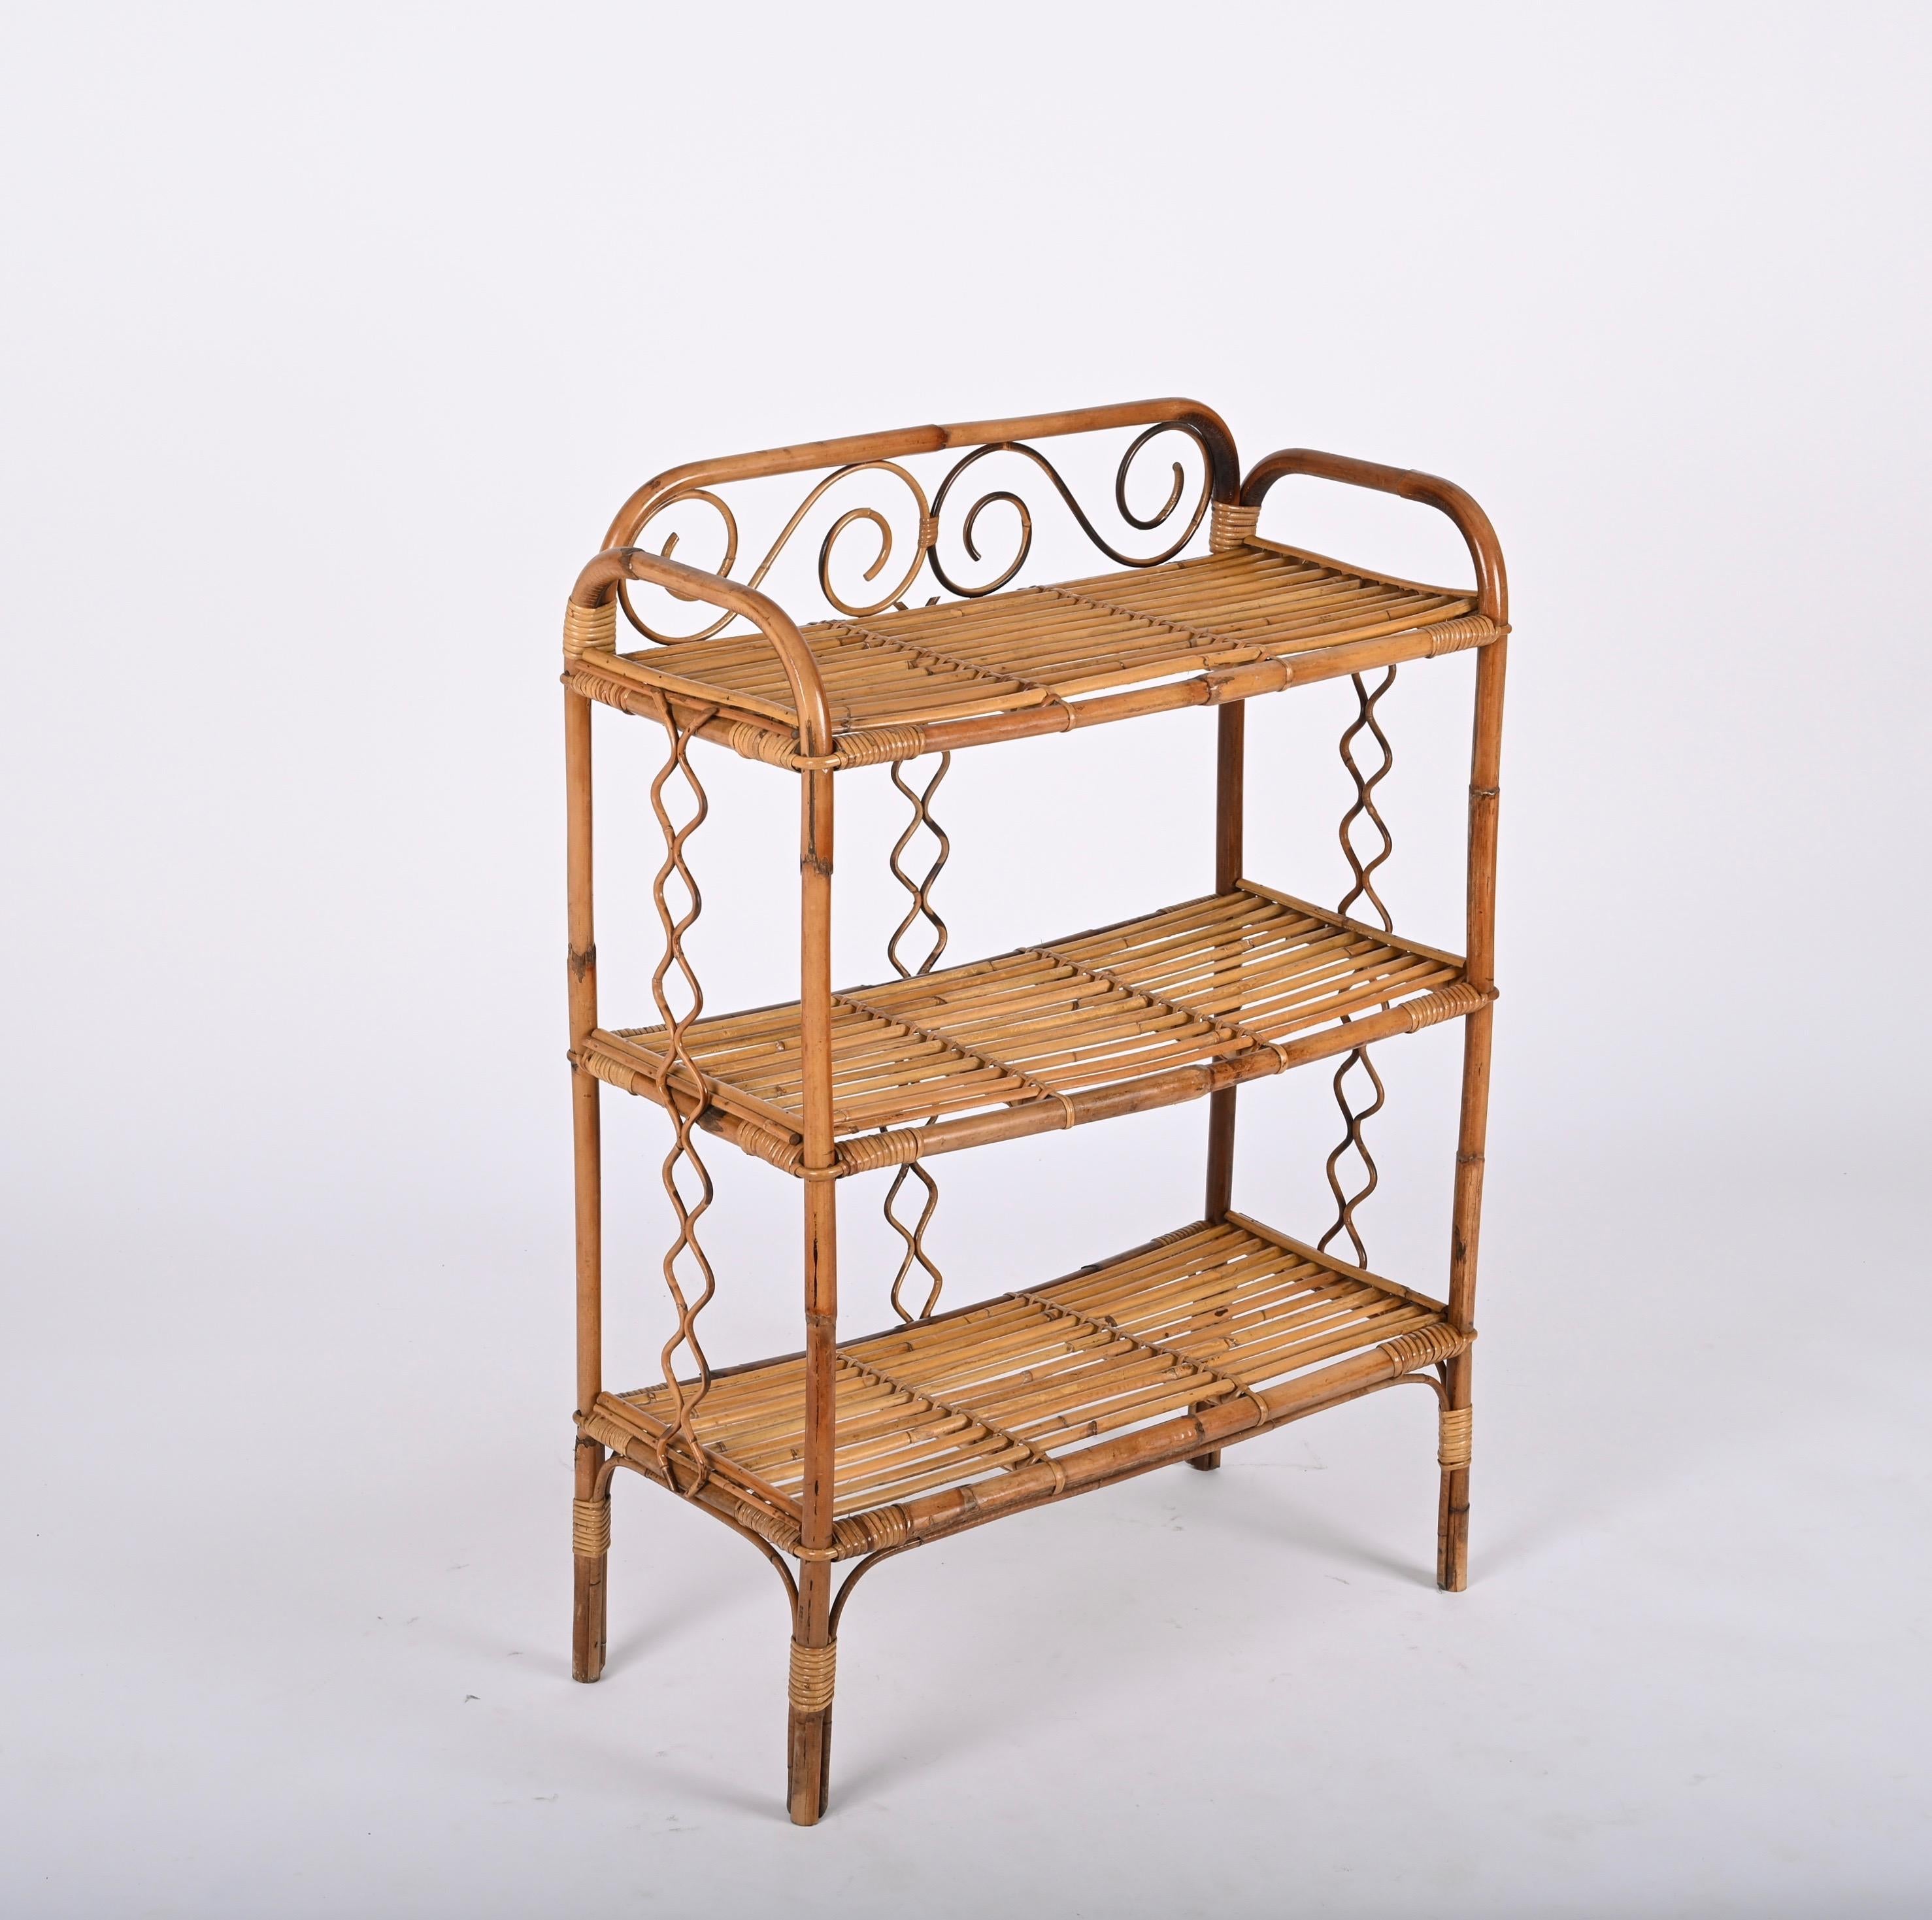 Midcentury Étagère Bamboo and Rattan, Italian Bookcase with Three Shelves, 1970s For Sale 5